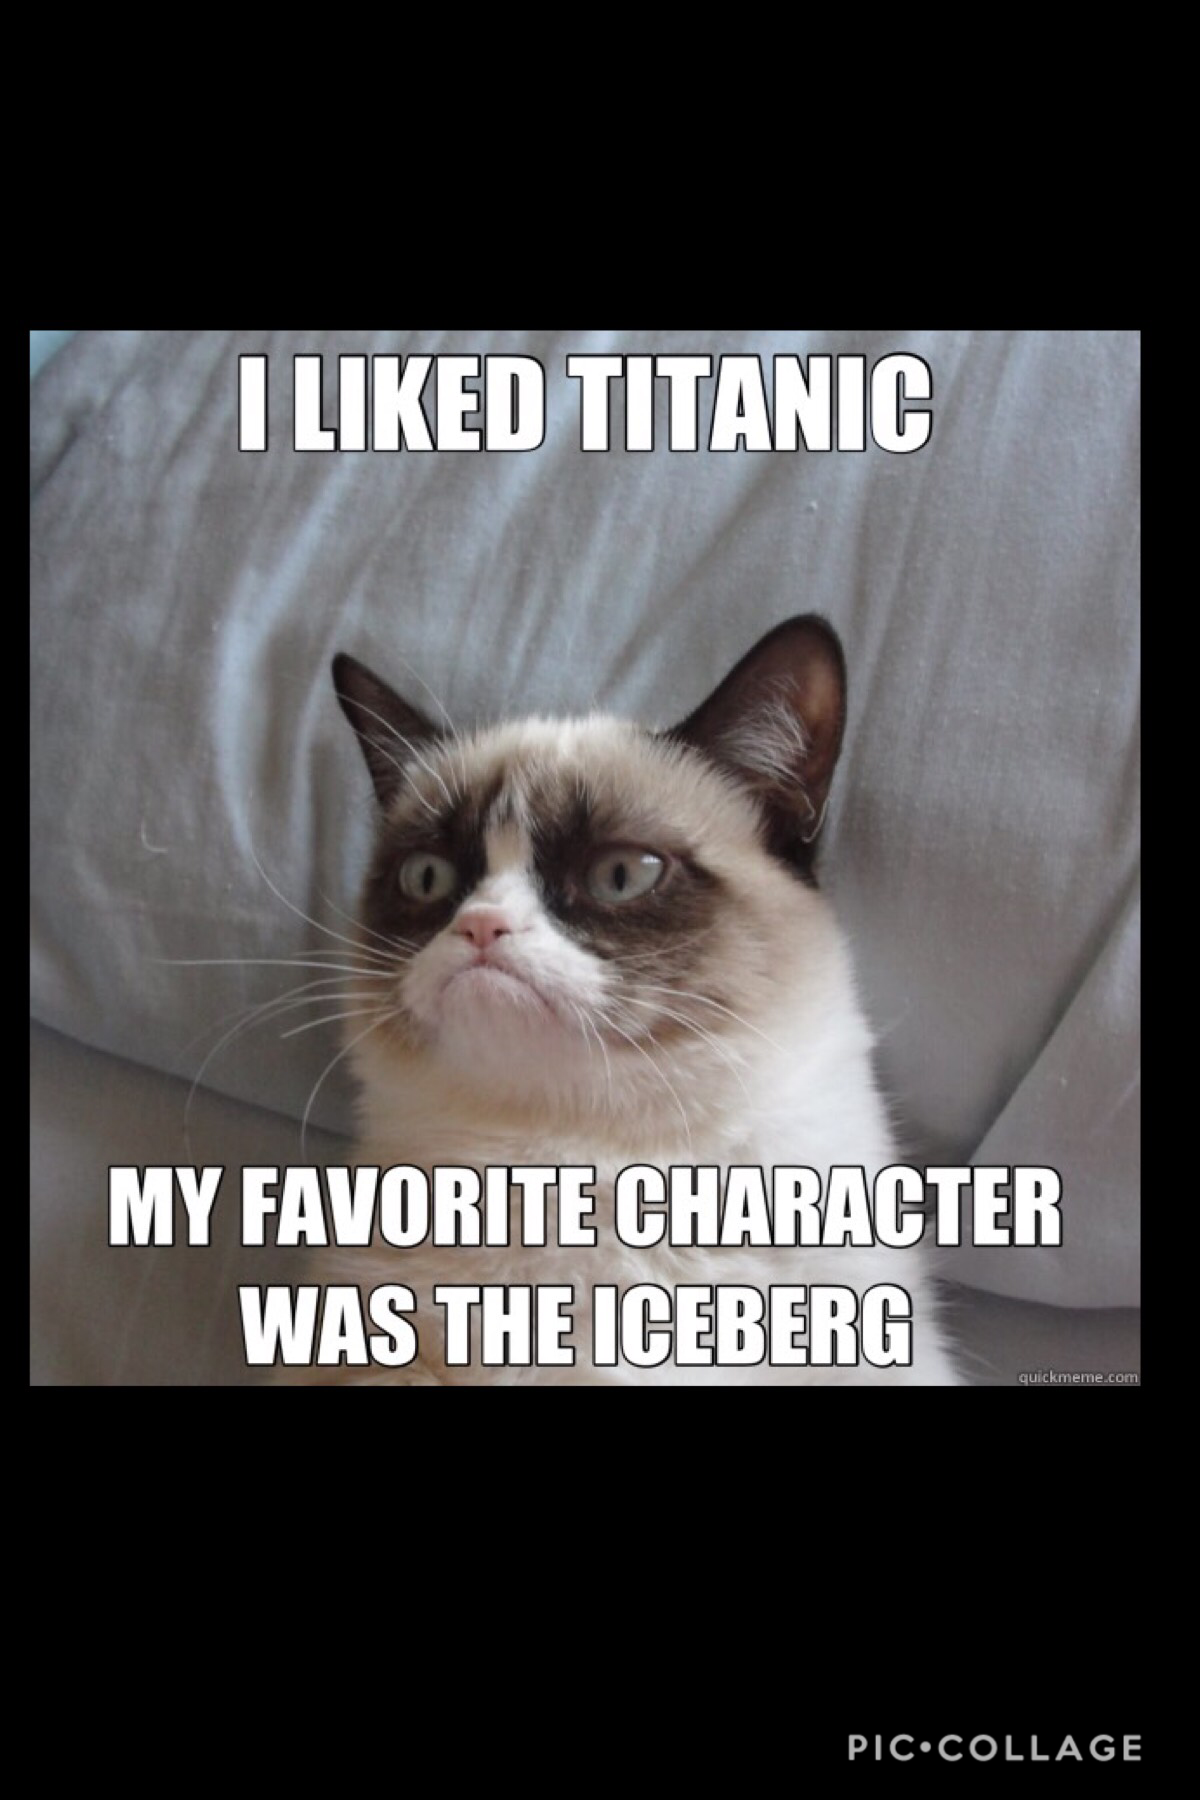 My favouite character was the iceberg too.